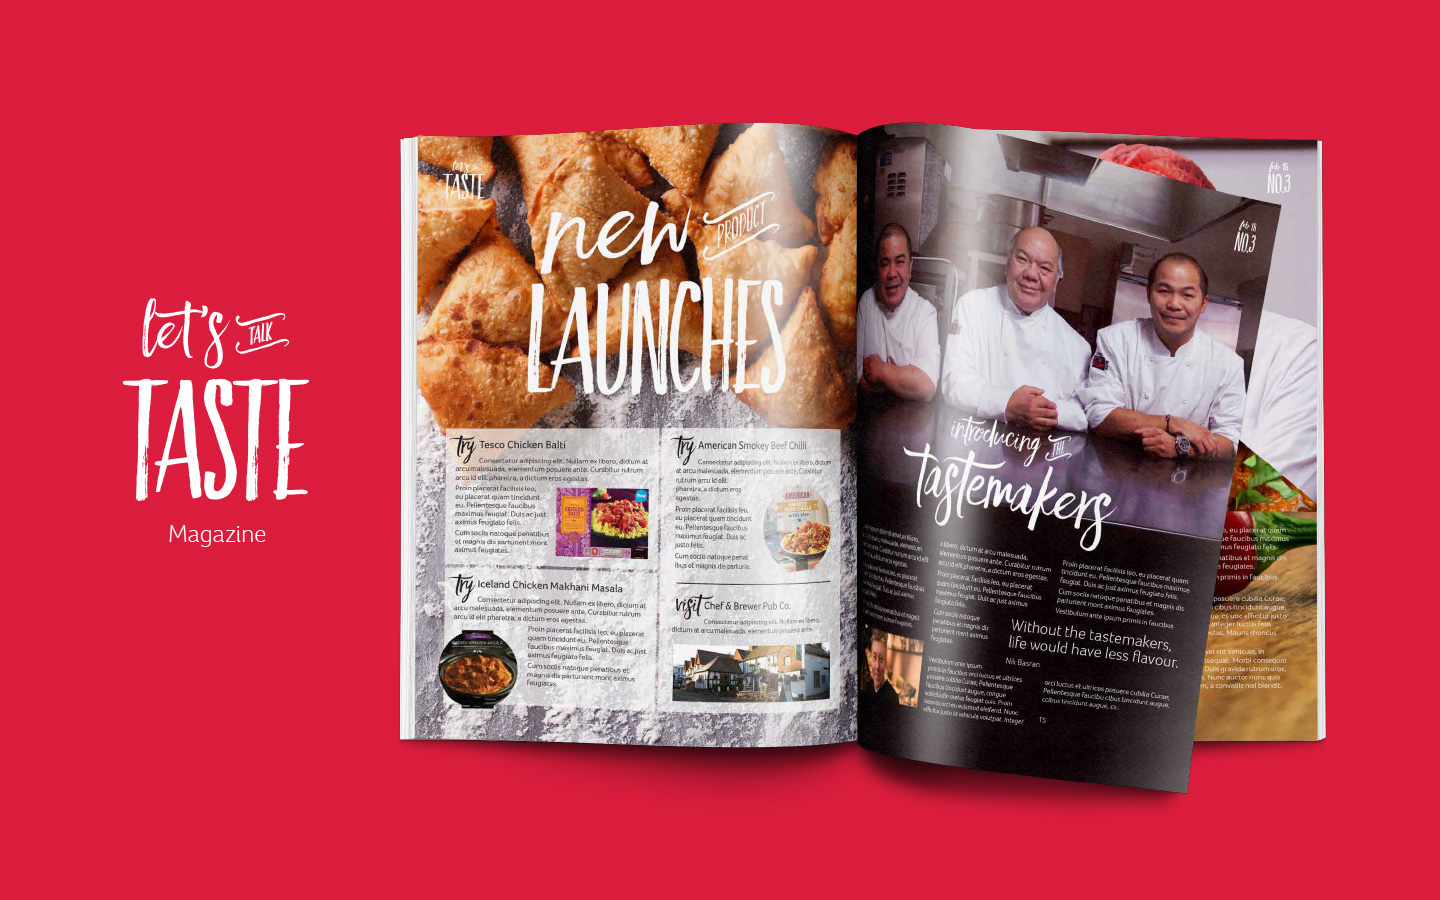 The Authentic Food Co. magazine